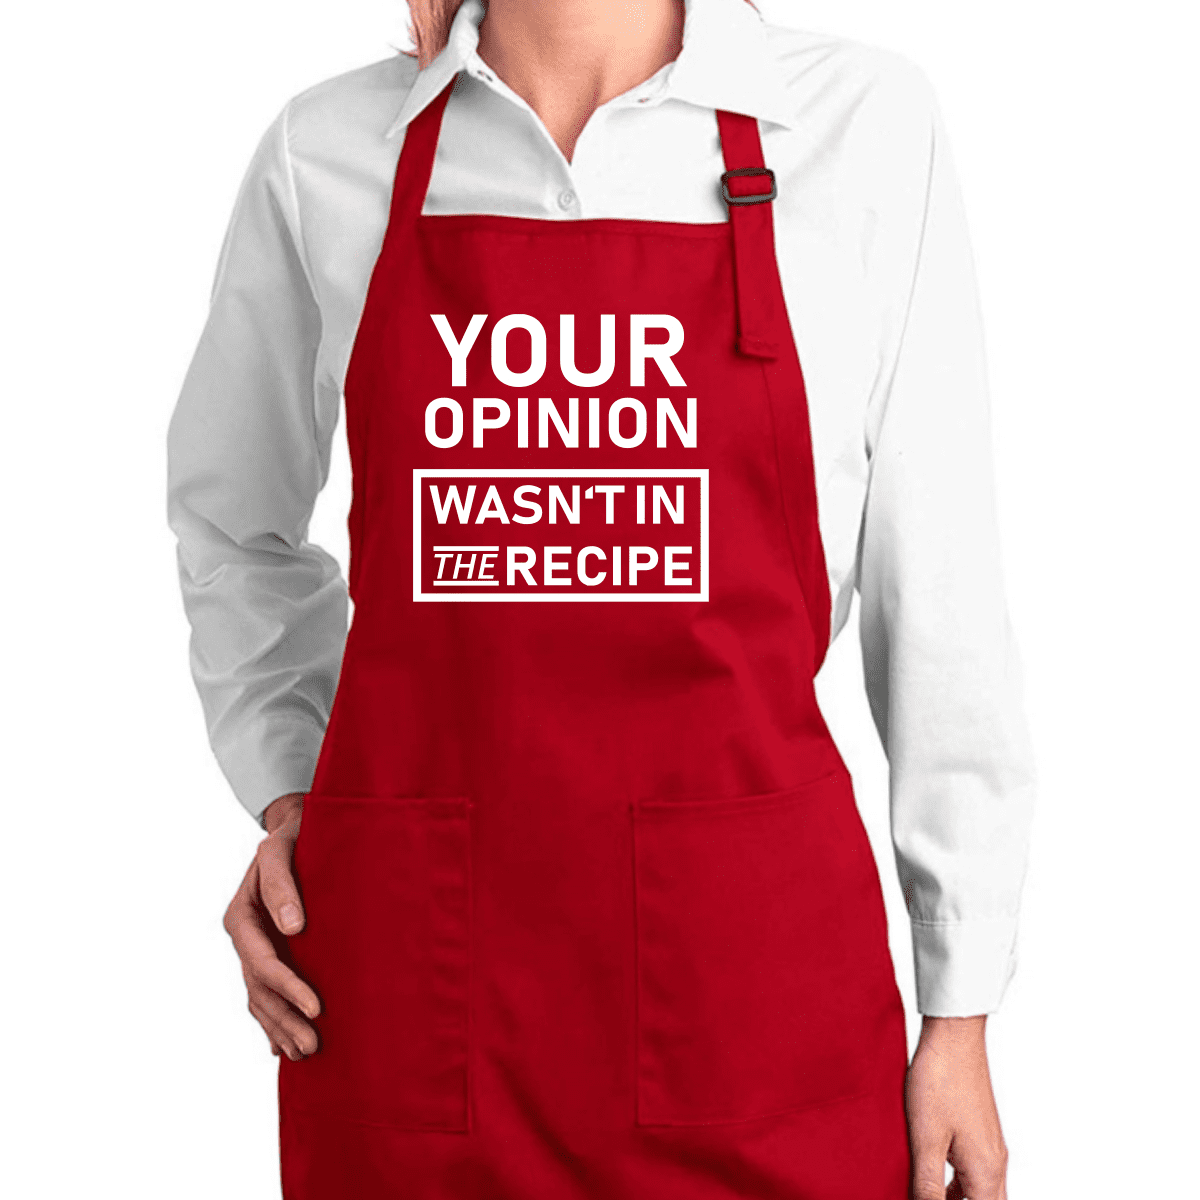 Funny Novelty Apron Kitchen Cooking Caution Grumpy Old Man 